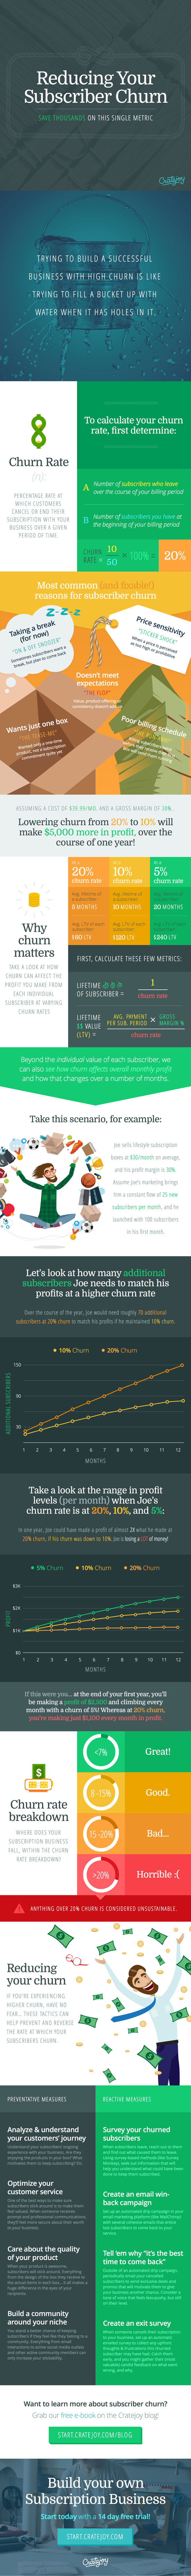 Subscriber Churn Infographic